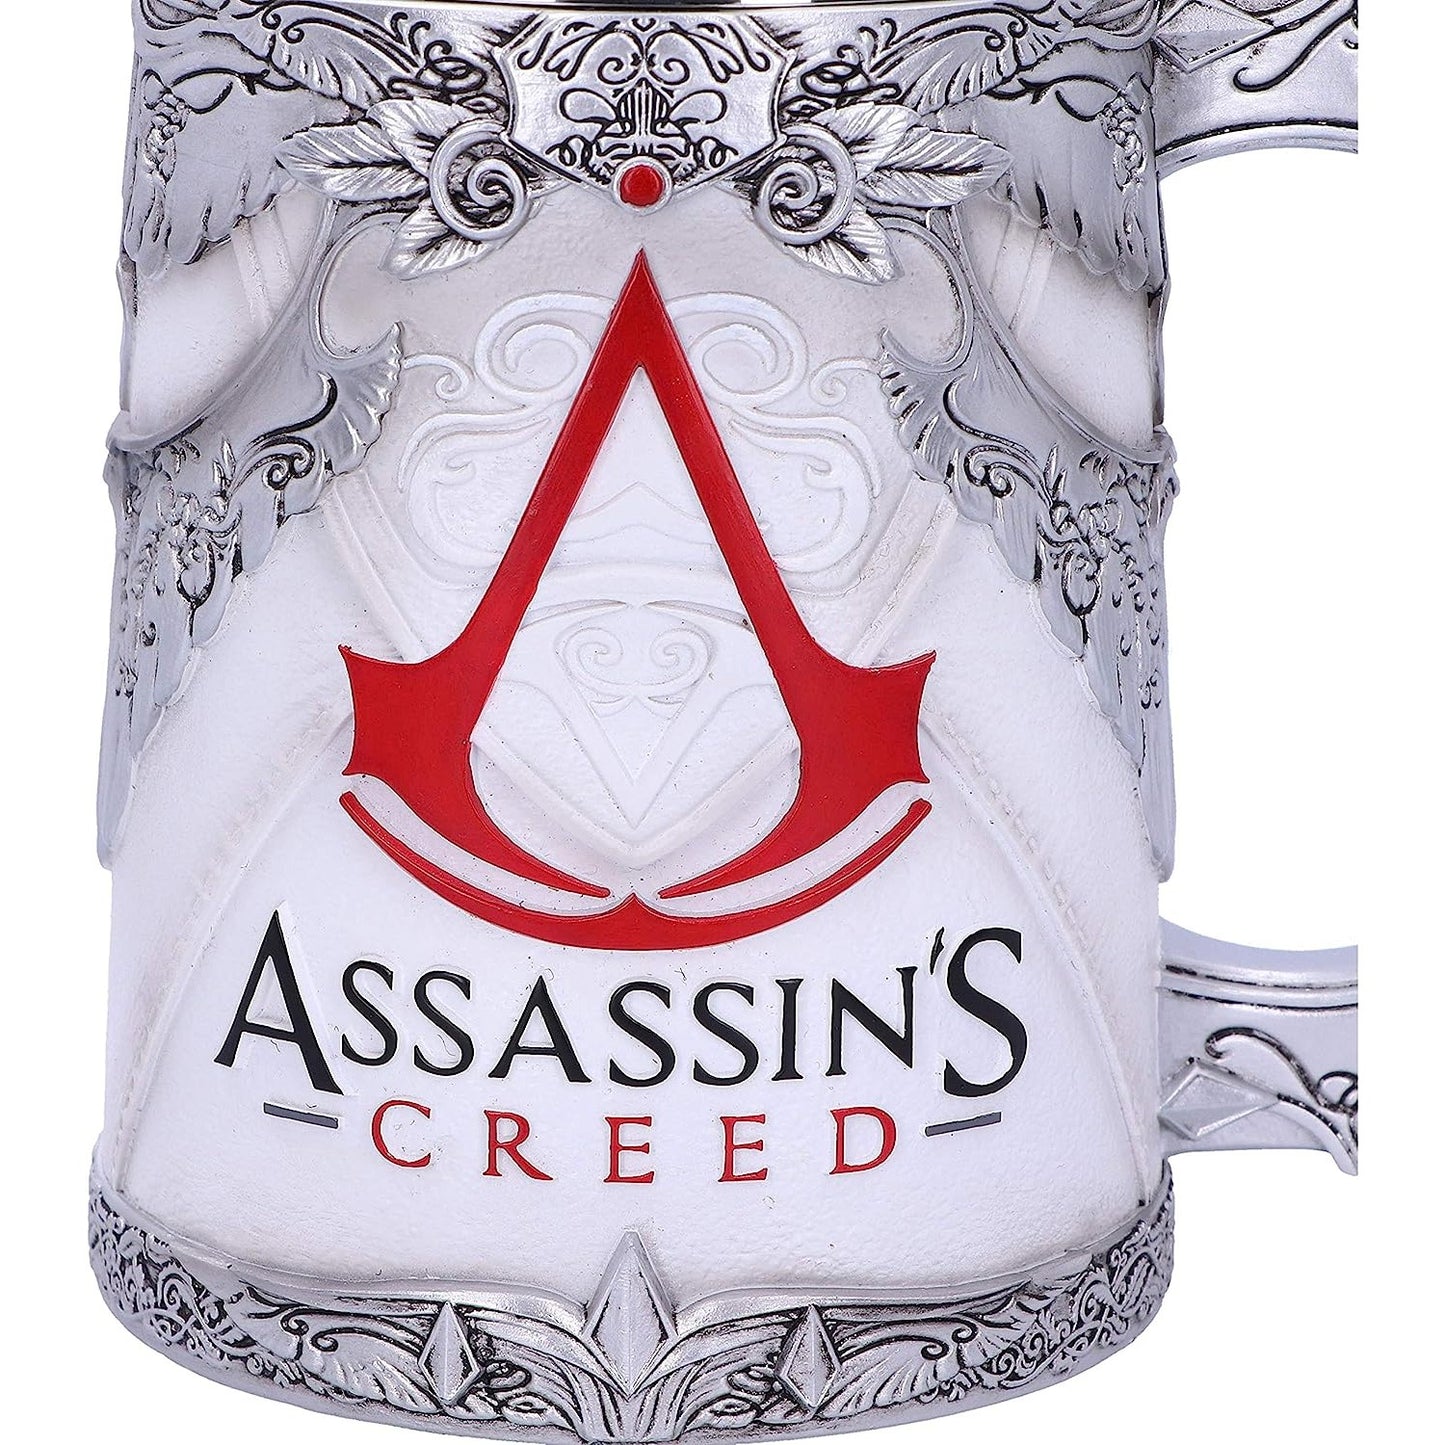 An officially licensed Assassin's Creed tankard.